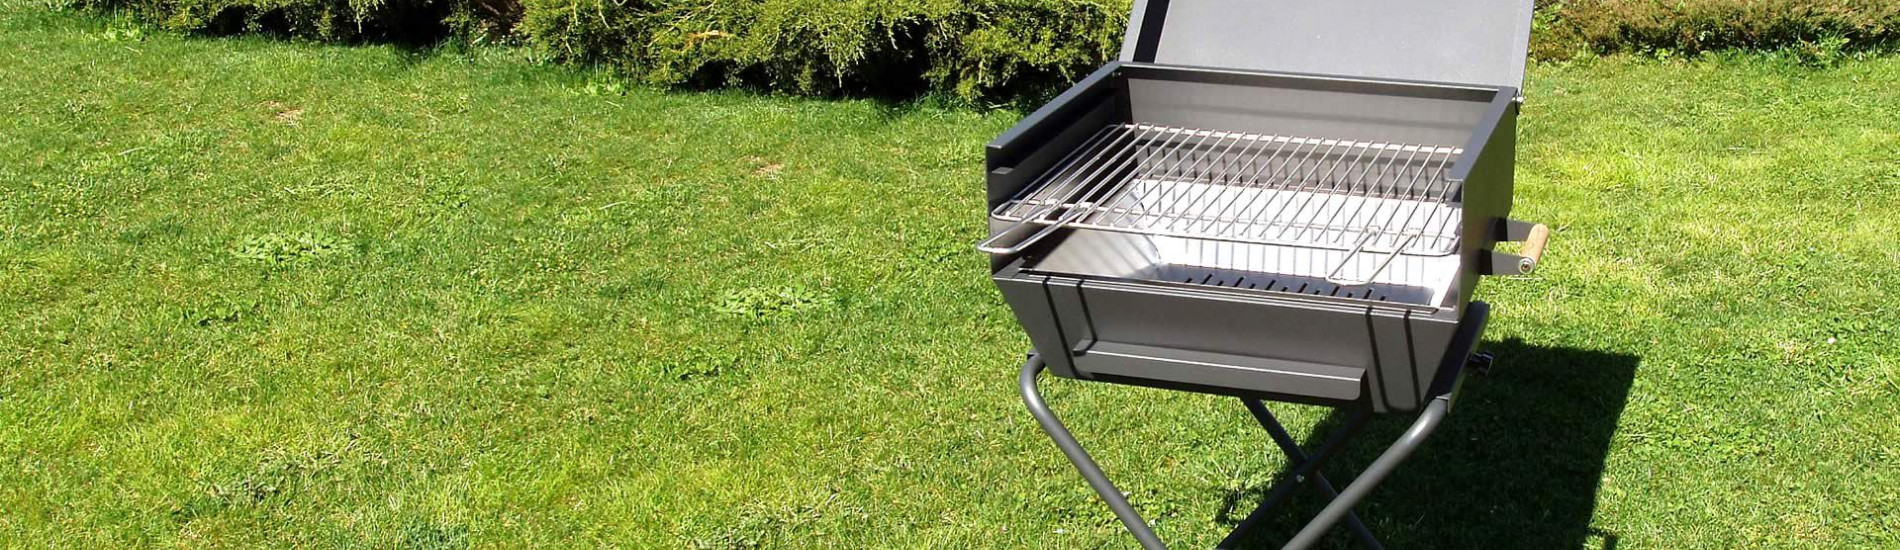 To make great barbecues ...